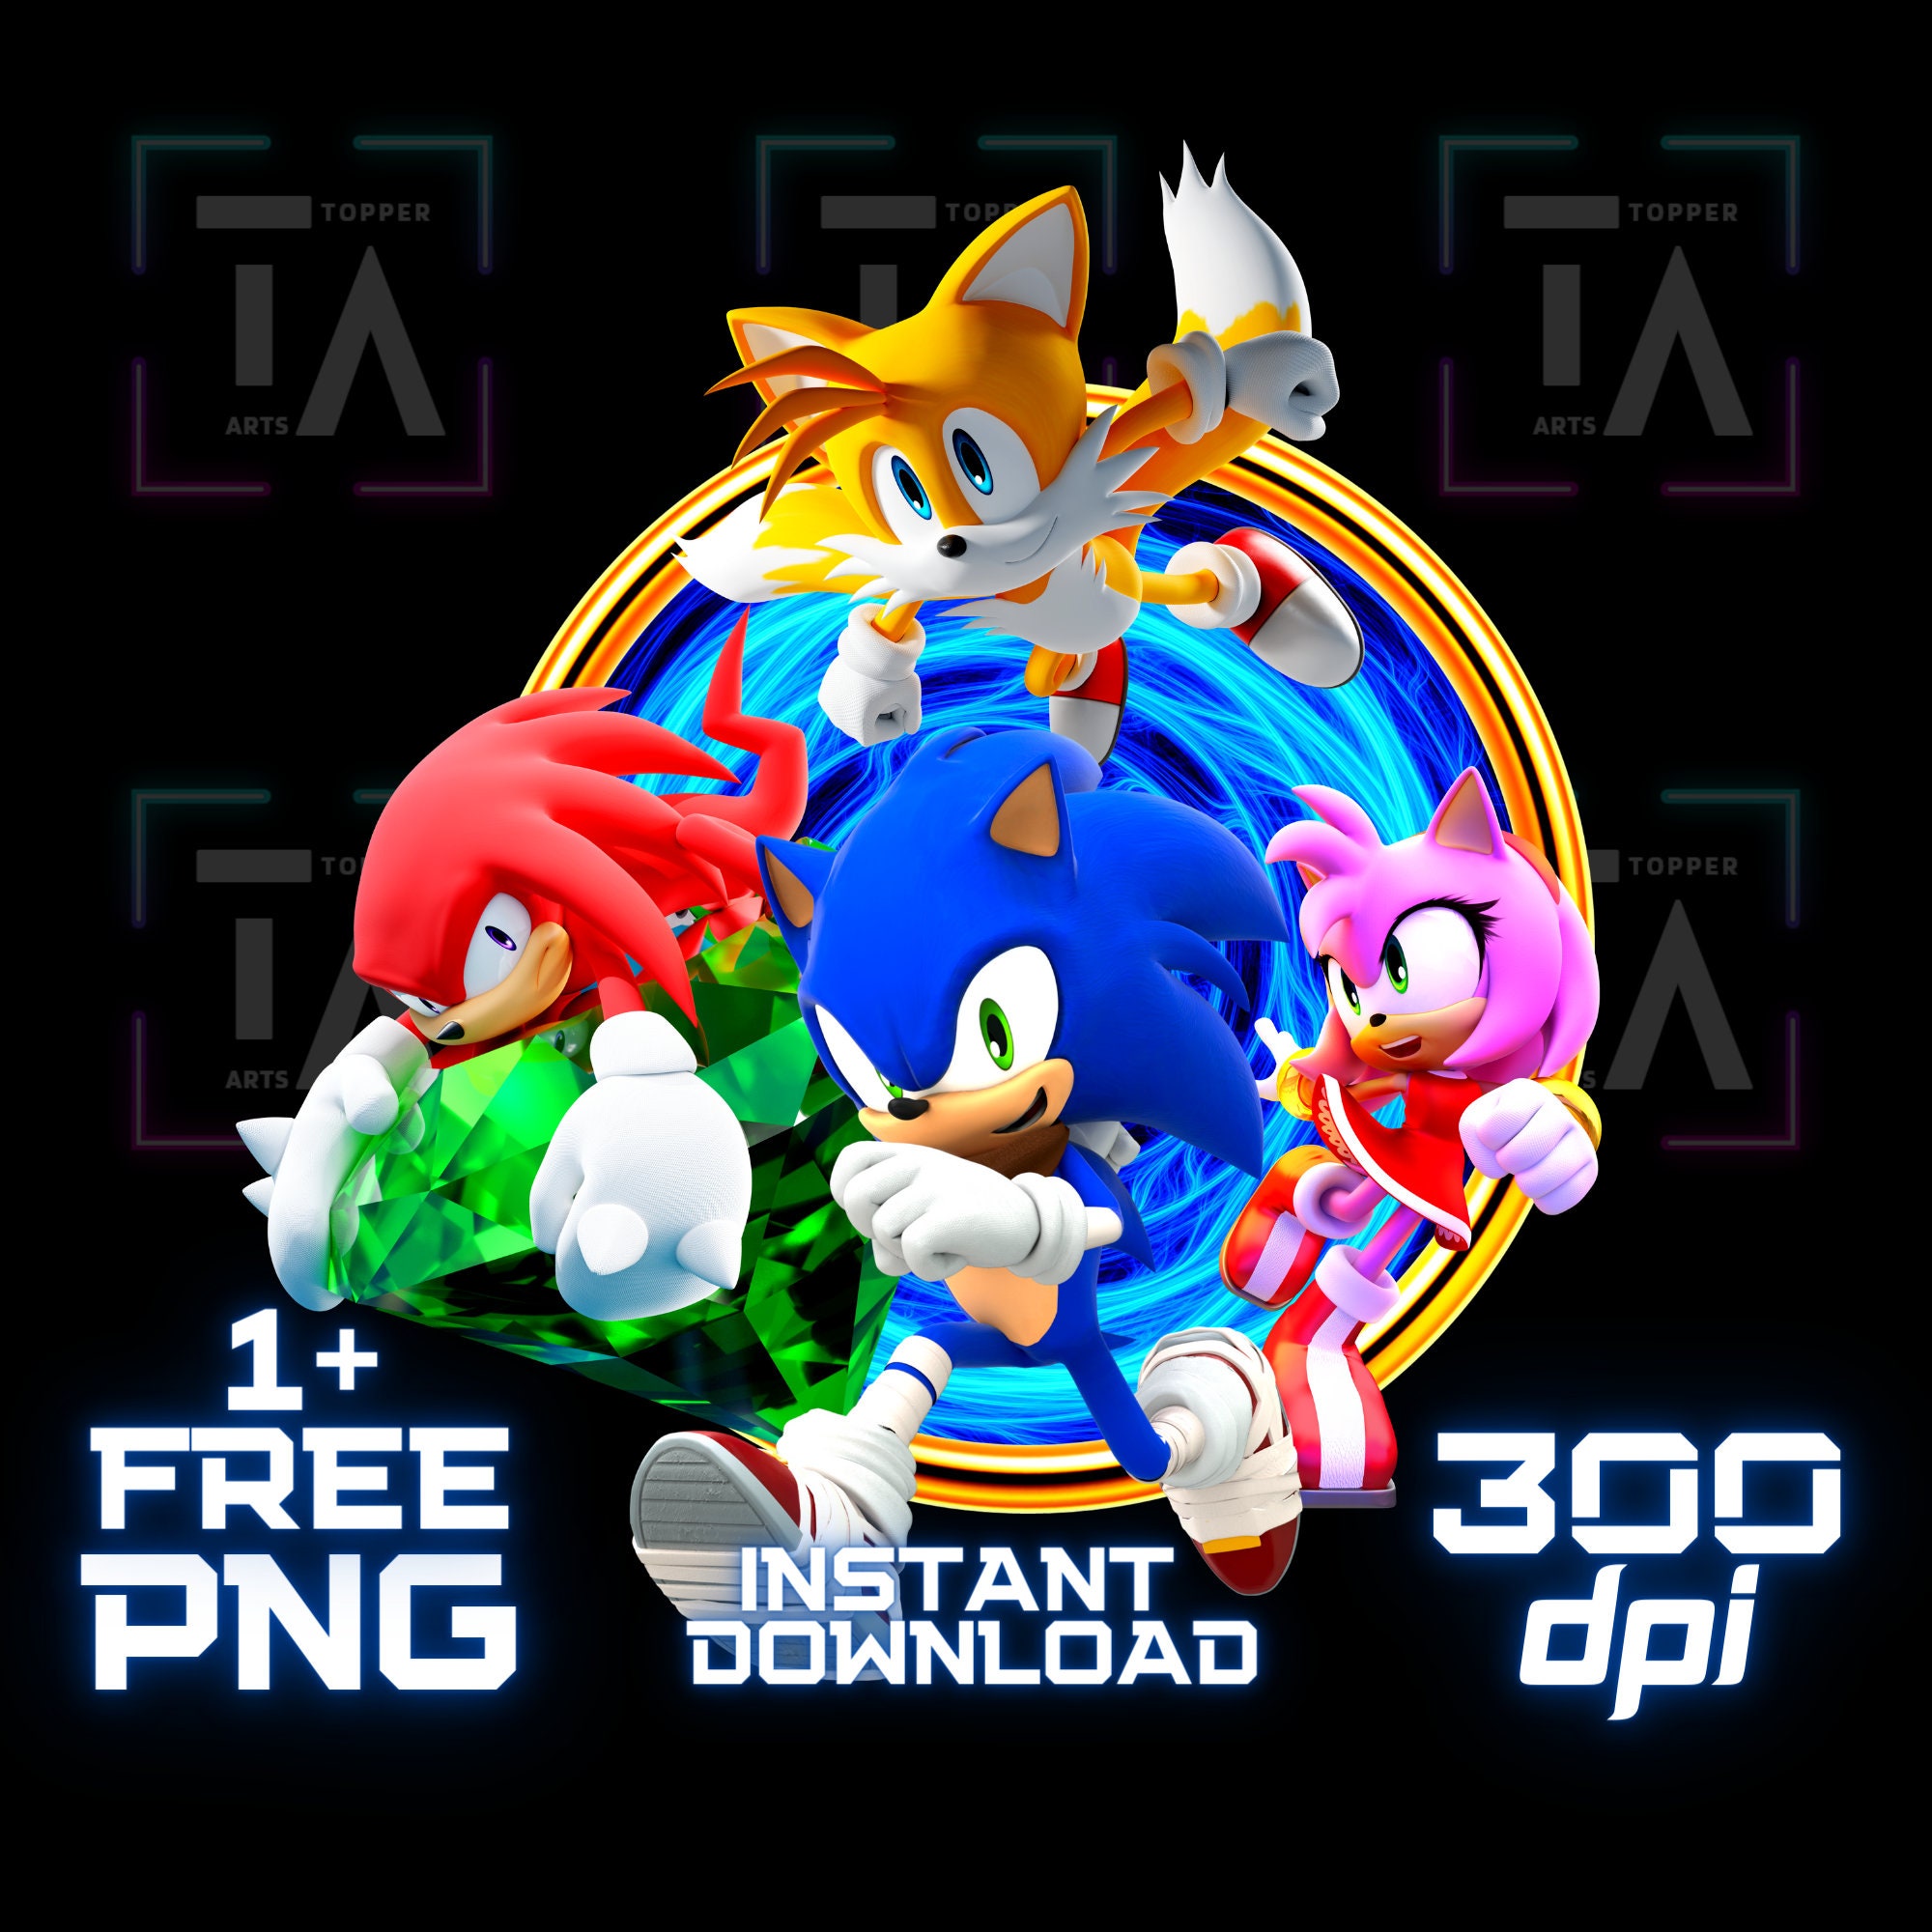 Download Sonic The Movie Hedgehog Free HQ Image HQ PNG Image